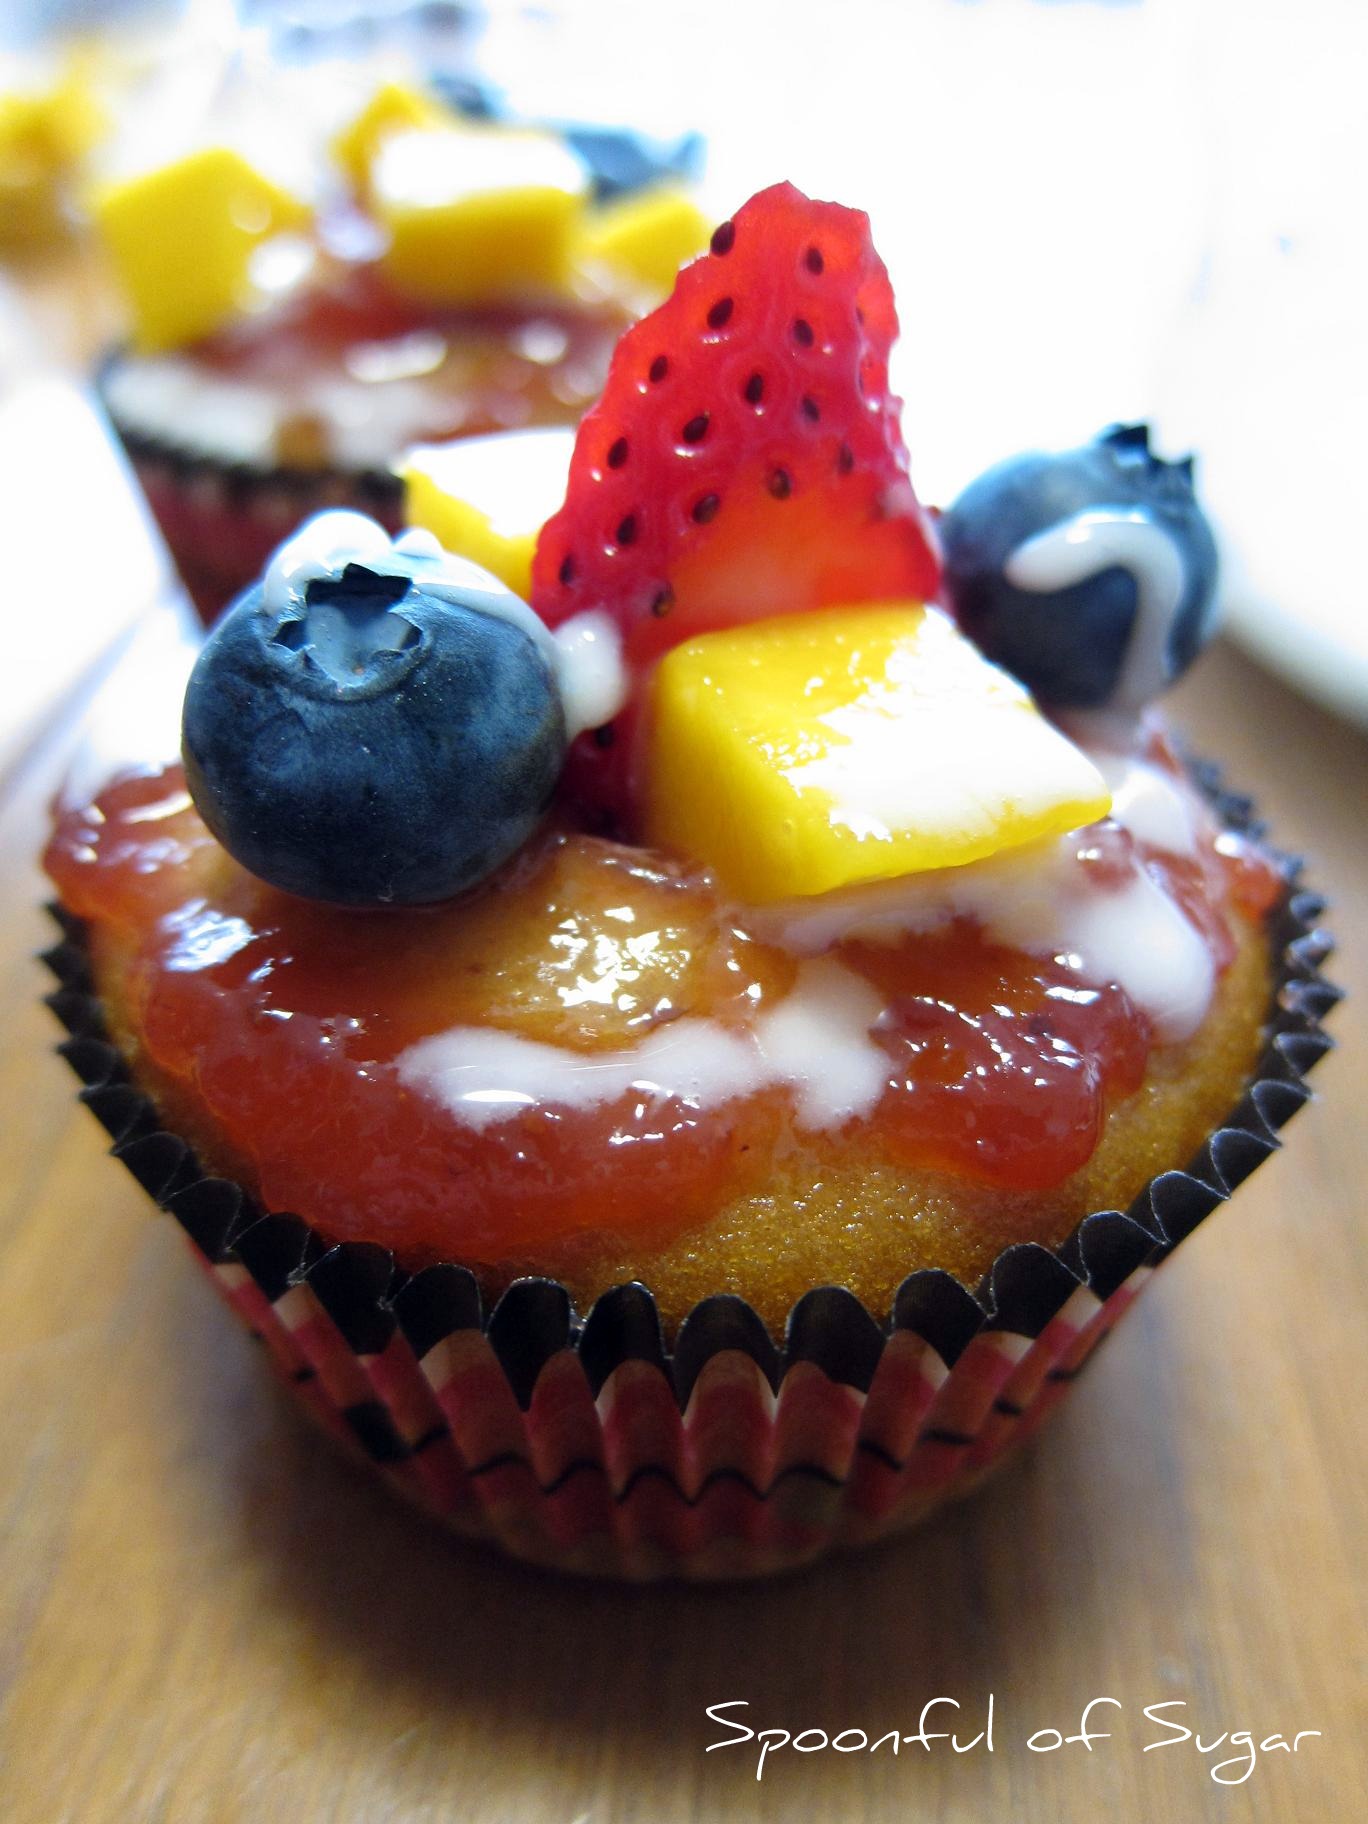 Vanilla and Agave Nectar Cupcakes Topped with Mixed Fruit ...